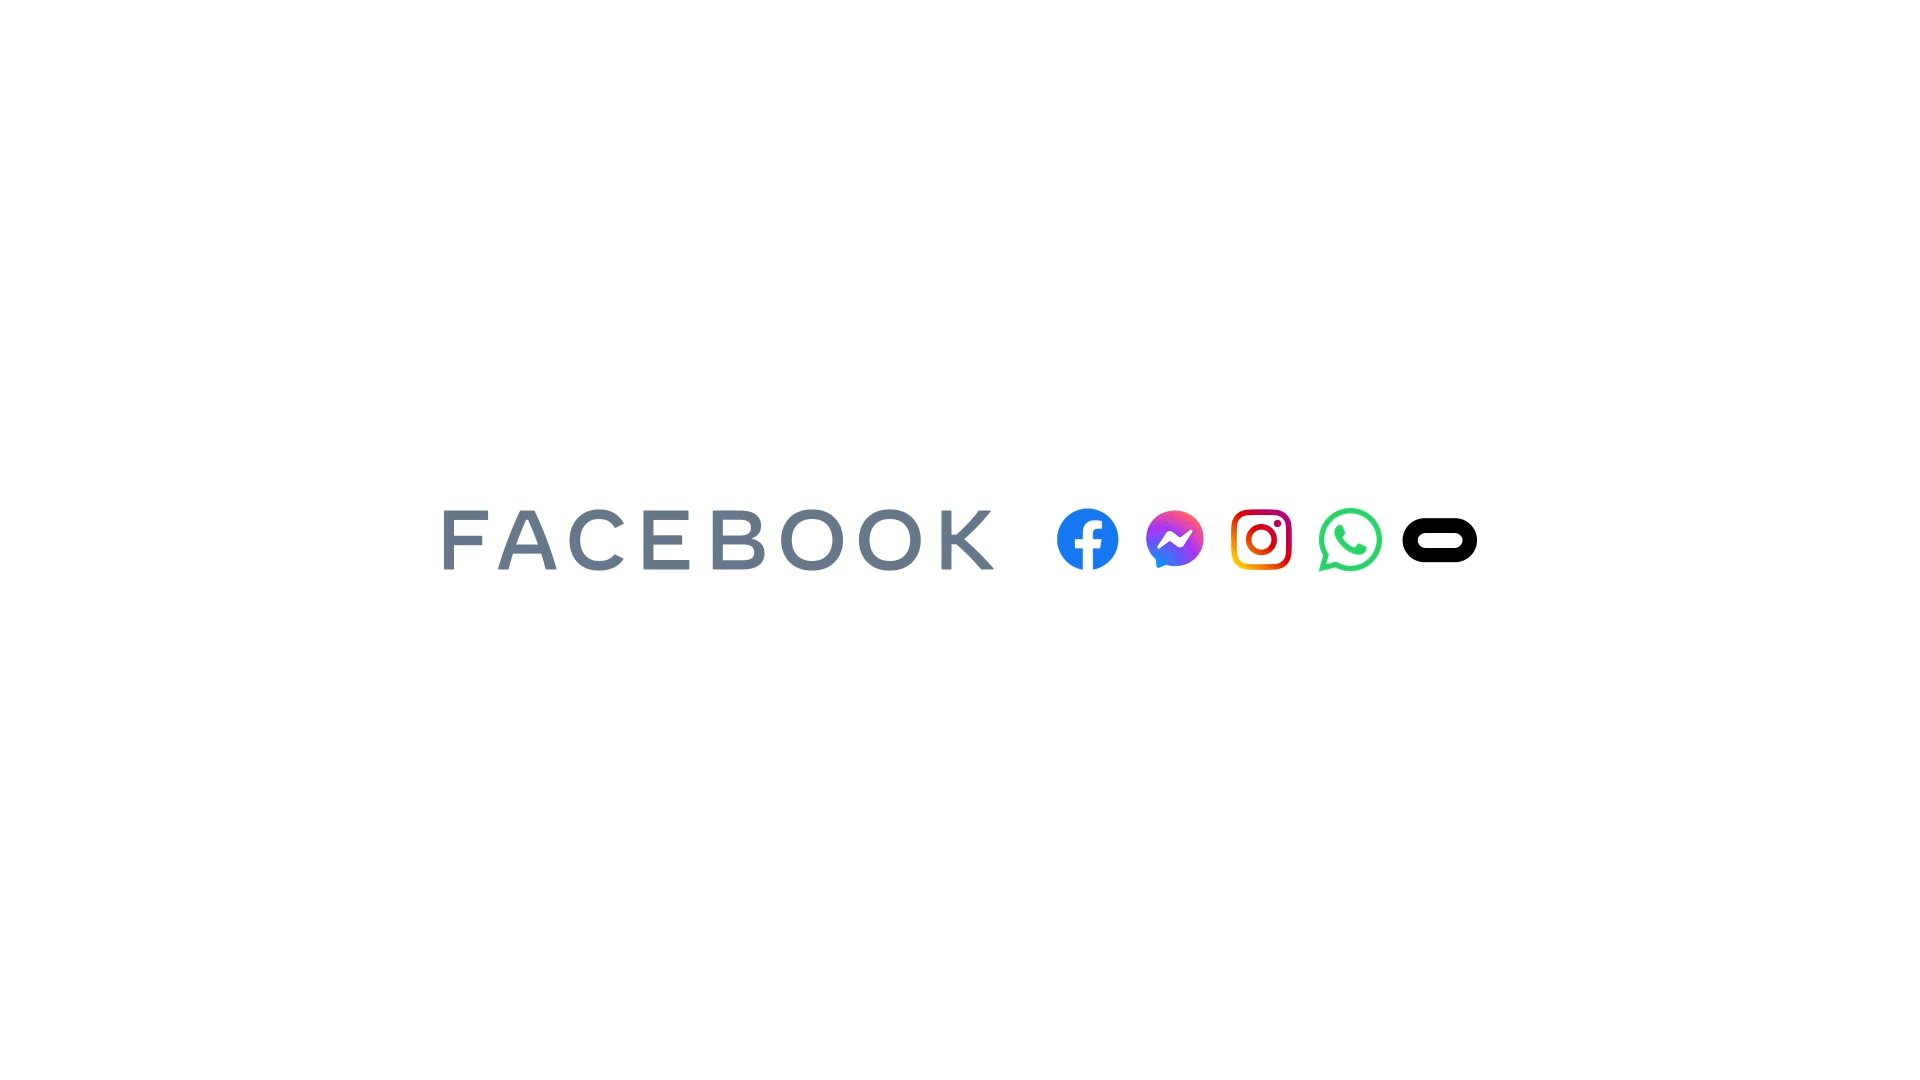 A gif designed by Meta to visually explain its transition from Facebook to Meta. 